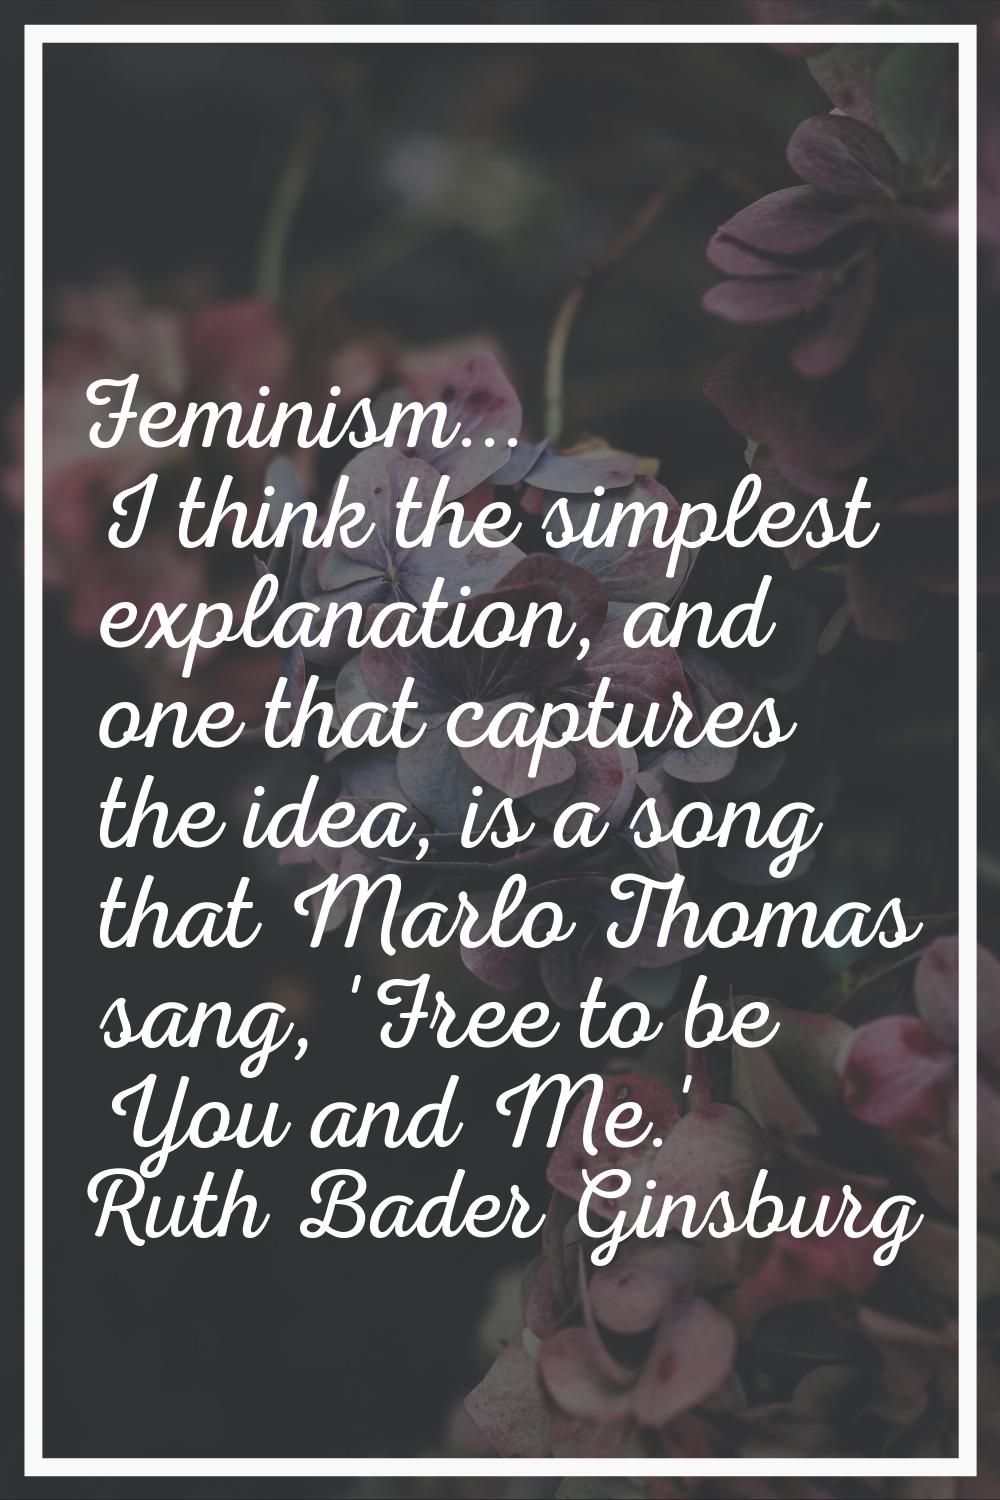 Feminism... I think the simplest explanation, and one that captures the idea, is a song that Marlo 